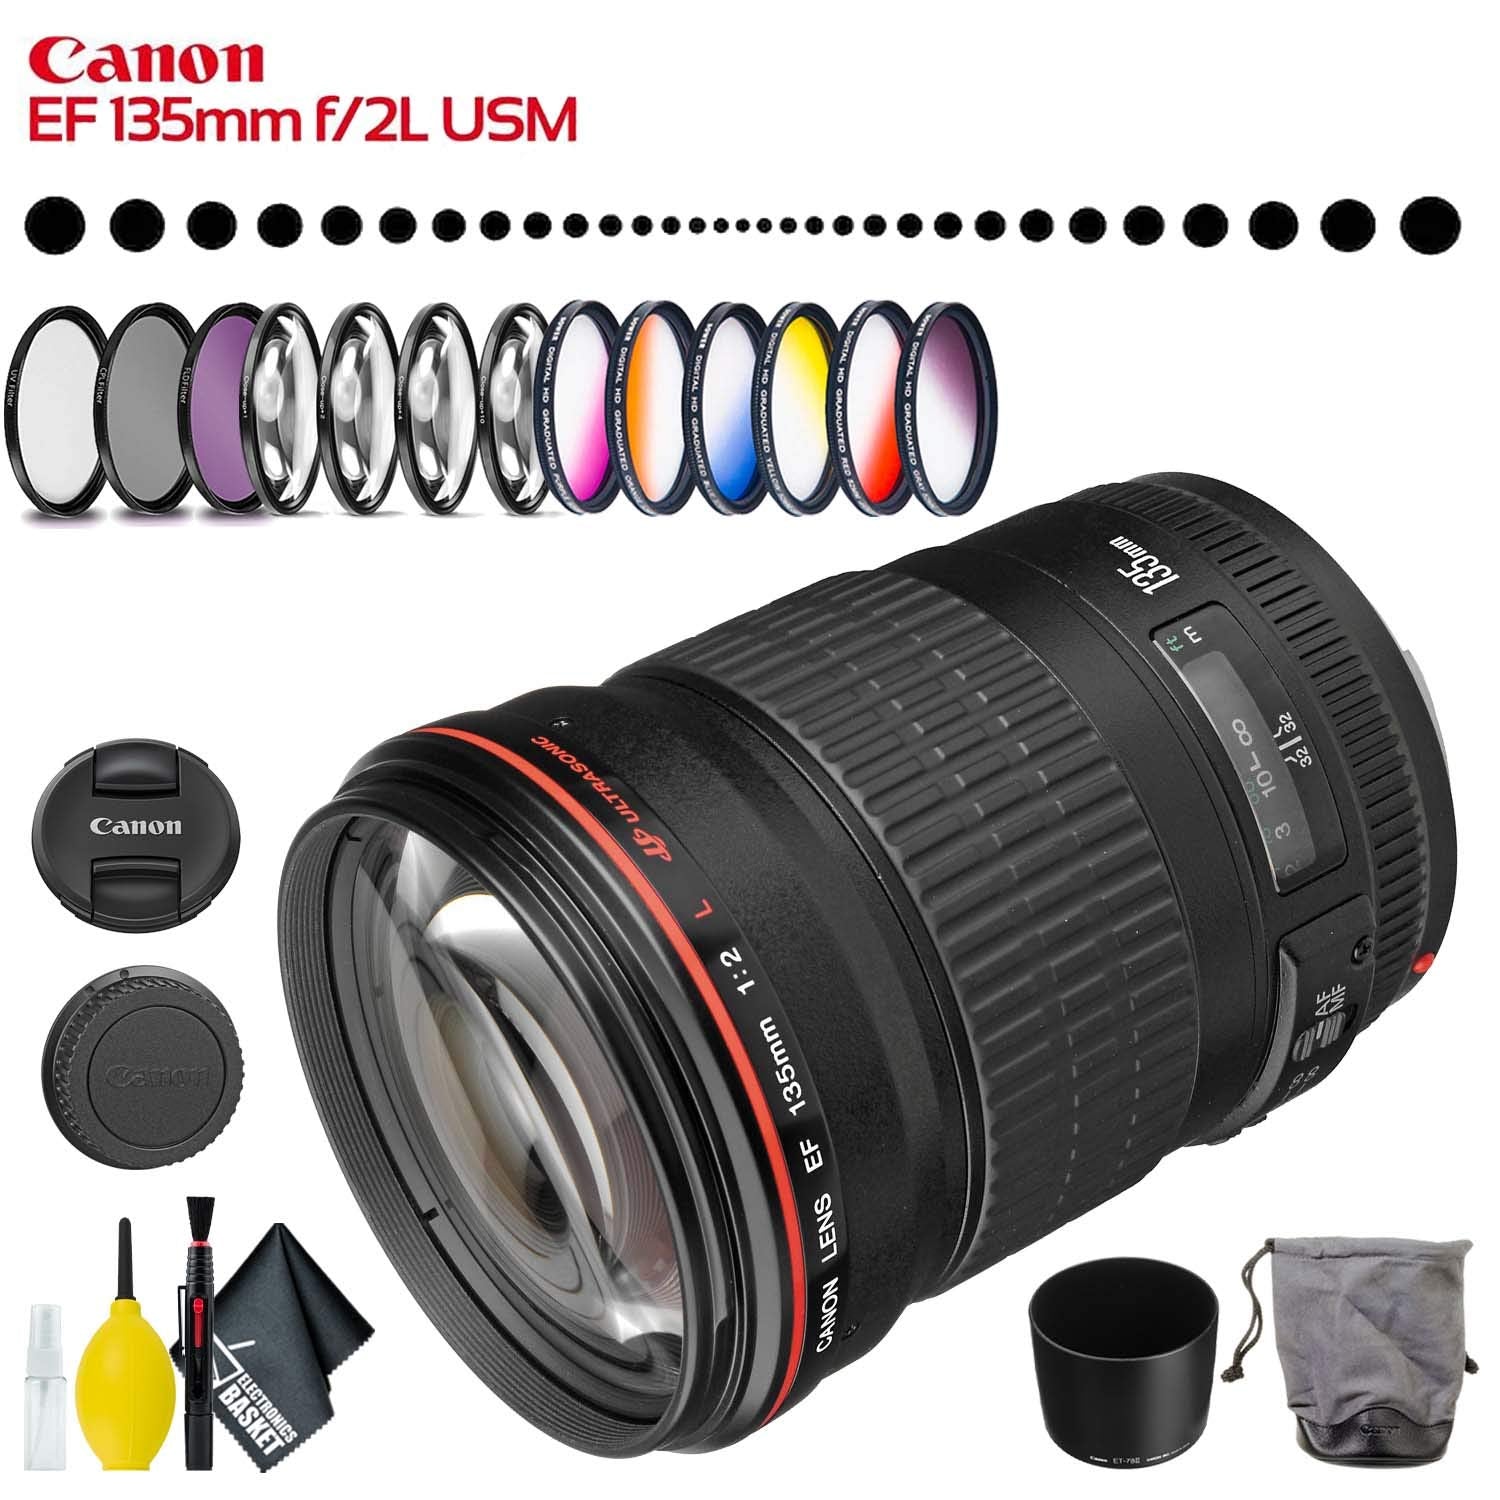 Canon EF 135mm f/2L USM Lens (Intl Model) with Filter Kit and Cleaning Kit